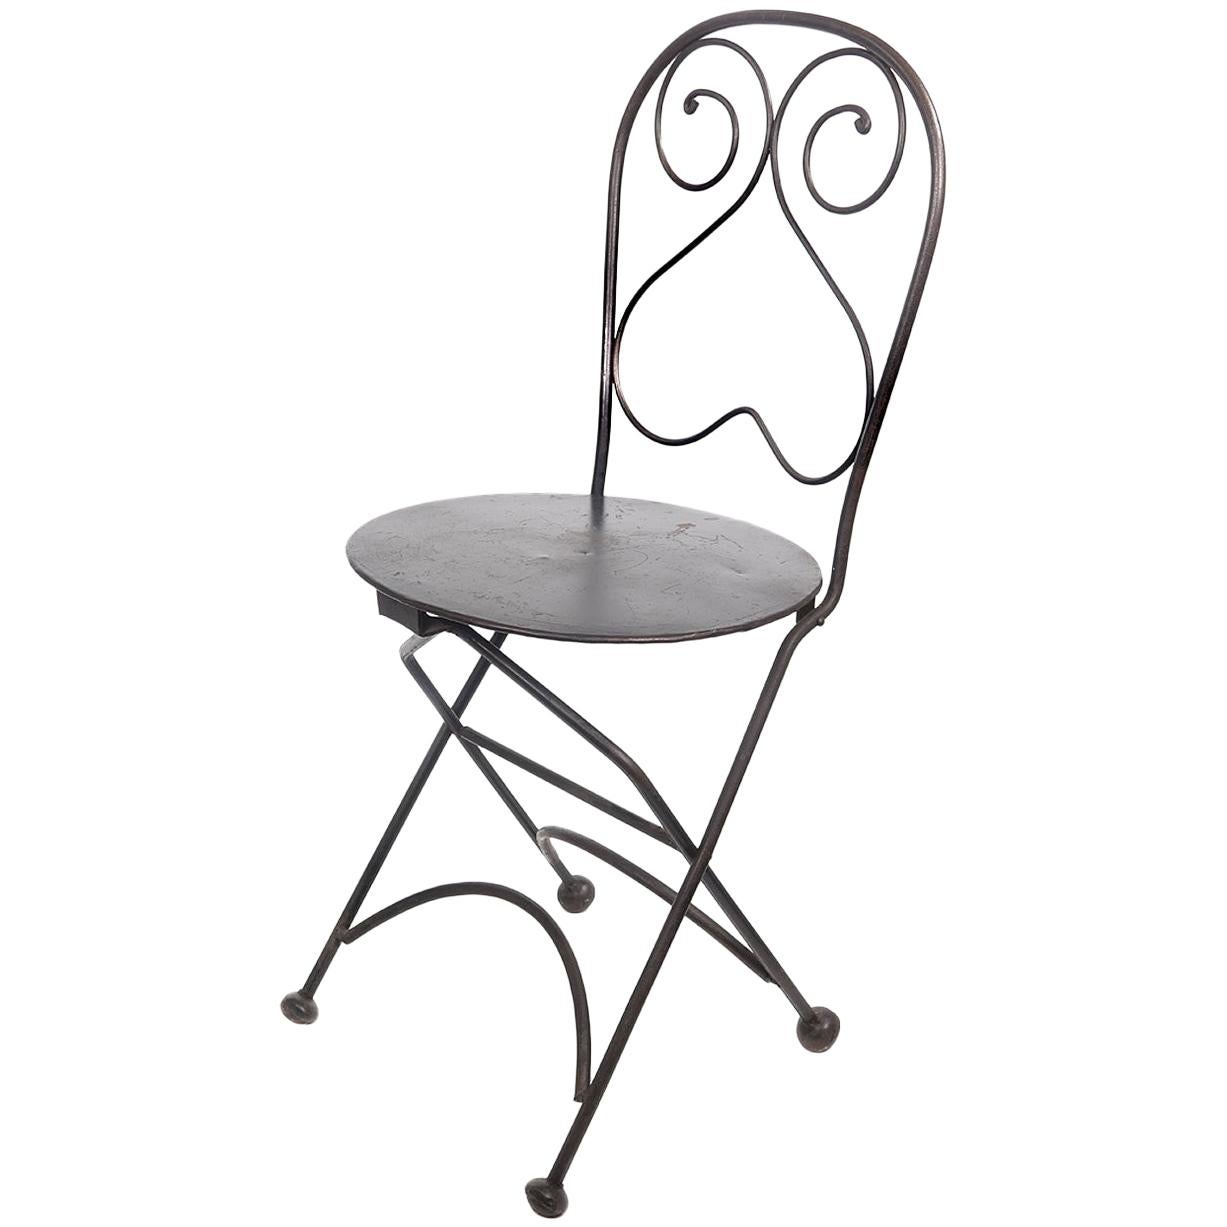 Single Bistro Style Folding Chair For Sale